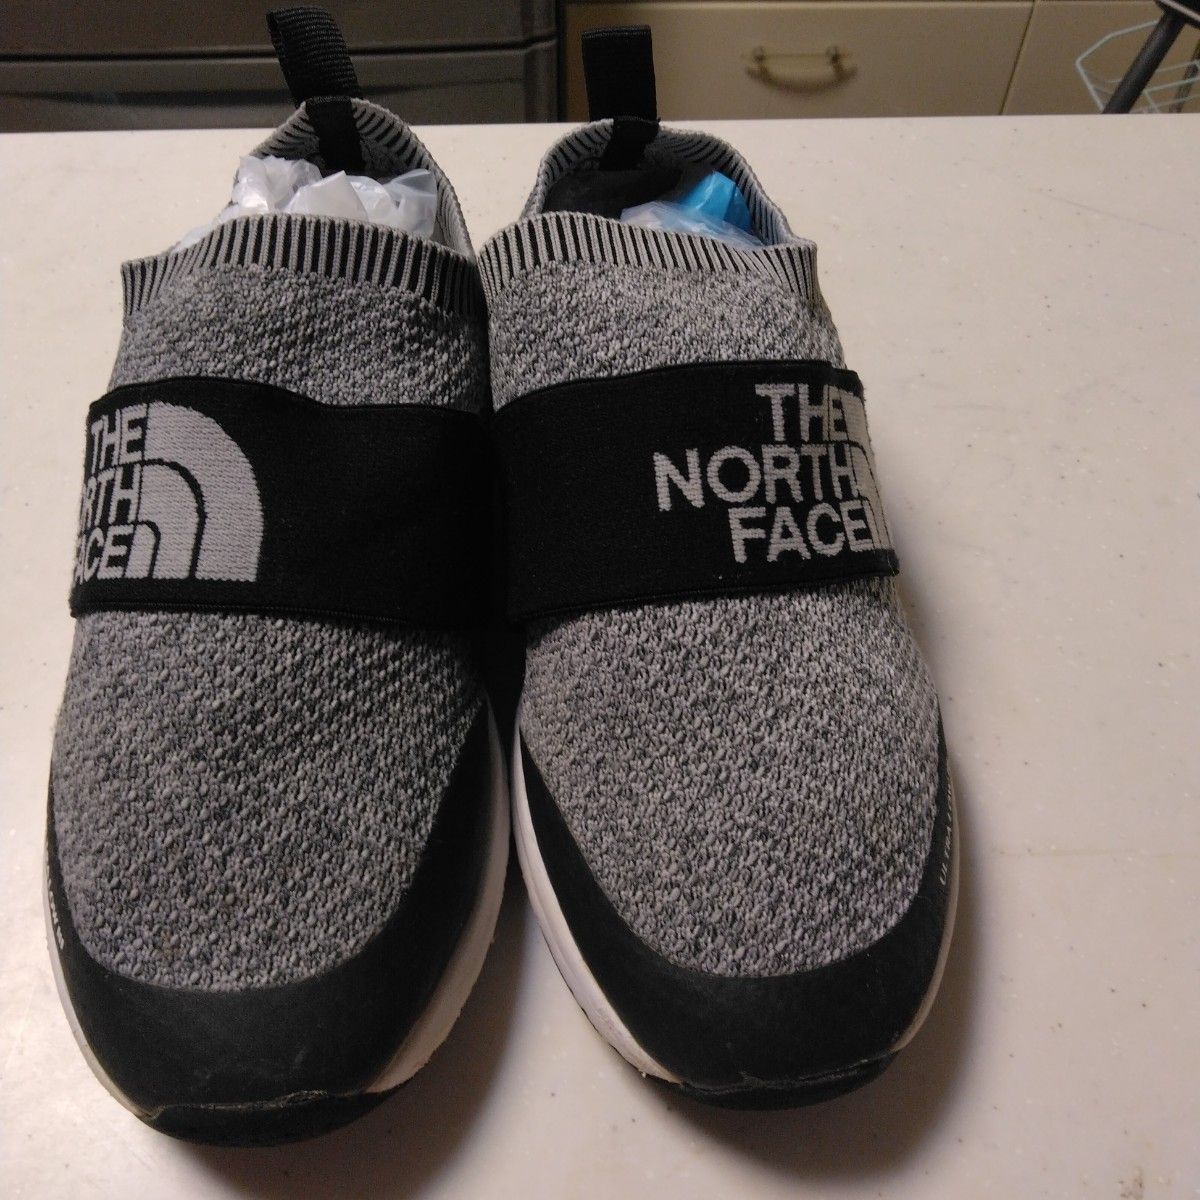  THE NORTH FACE　スニーカー